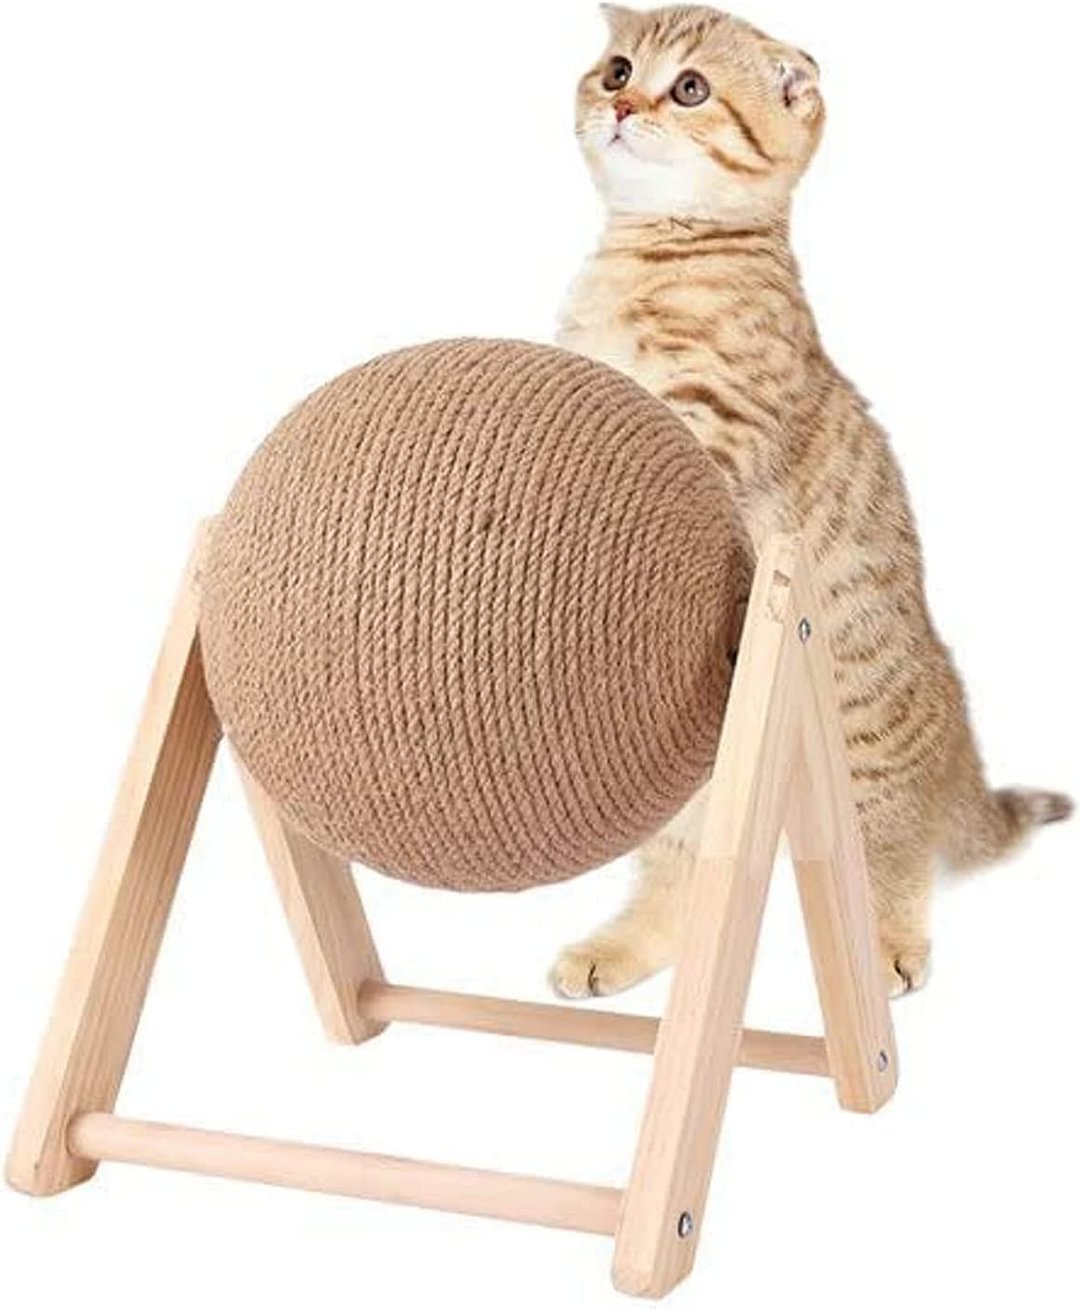 Cat Scratching Posts, Cat Scratcher Toy,Natural Sisal Cat Scratching Ball,Cat Scratcher Toy with Ball,Scratching Ball for Cats and Kittens,Interactive Solid Wood Scratcher Pet Toy